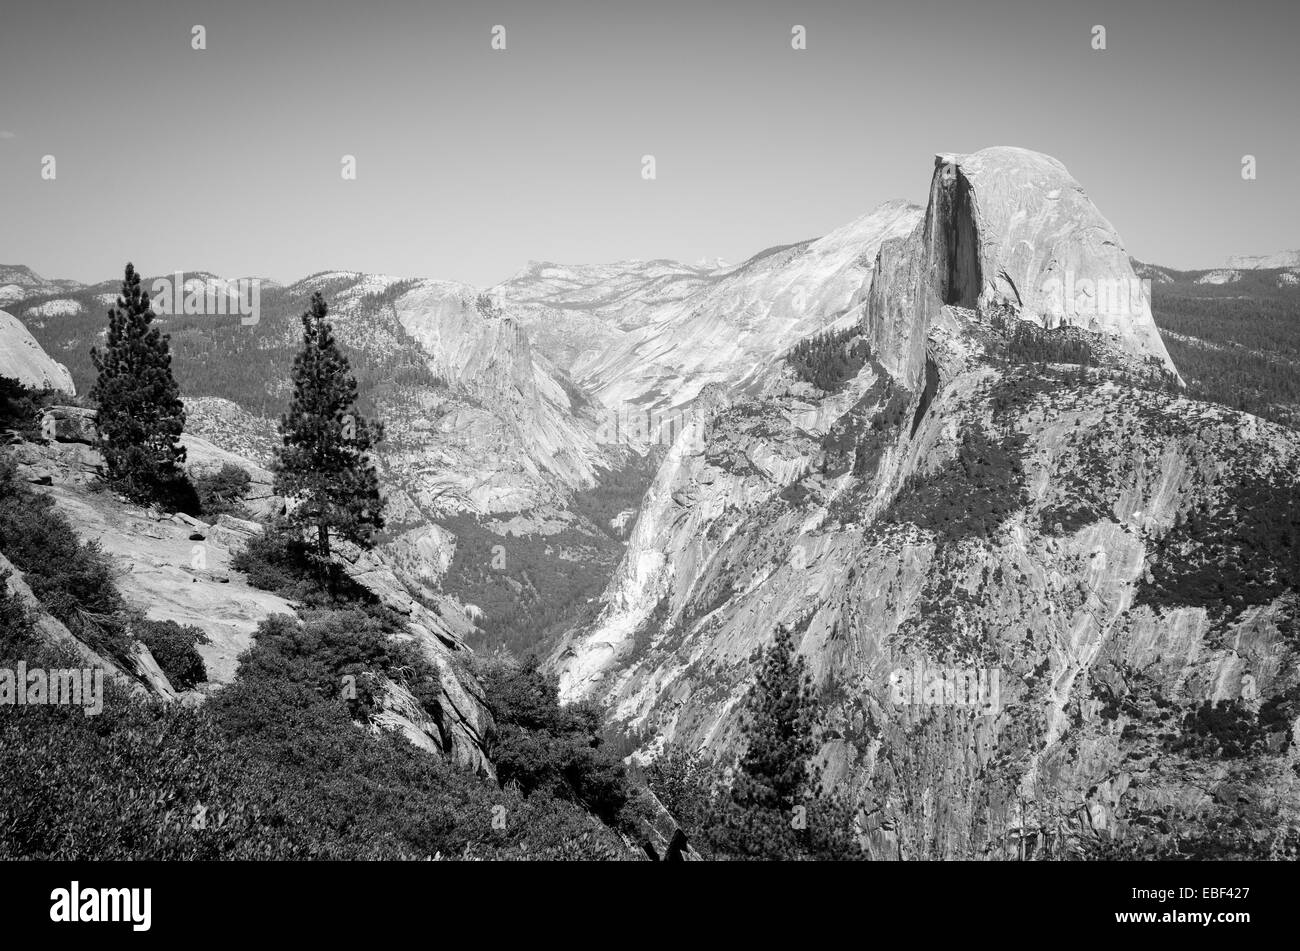 The iconic Half Dome as seen from Glacier Point in Yosemite National Park Stock Photo